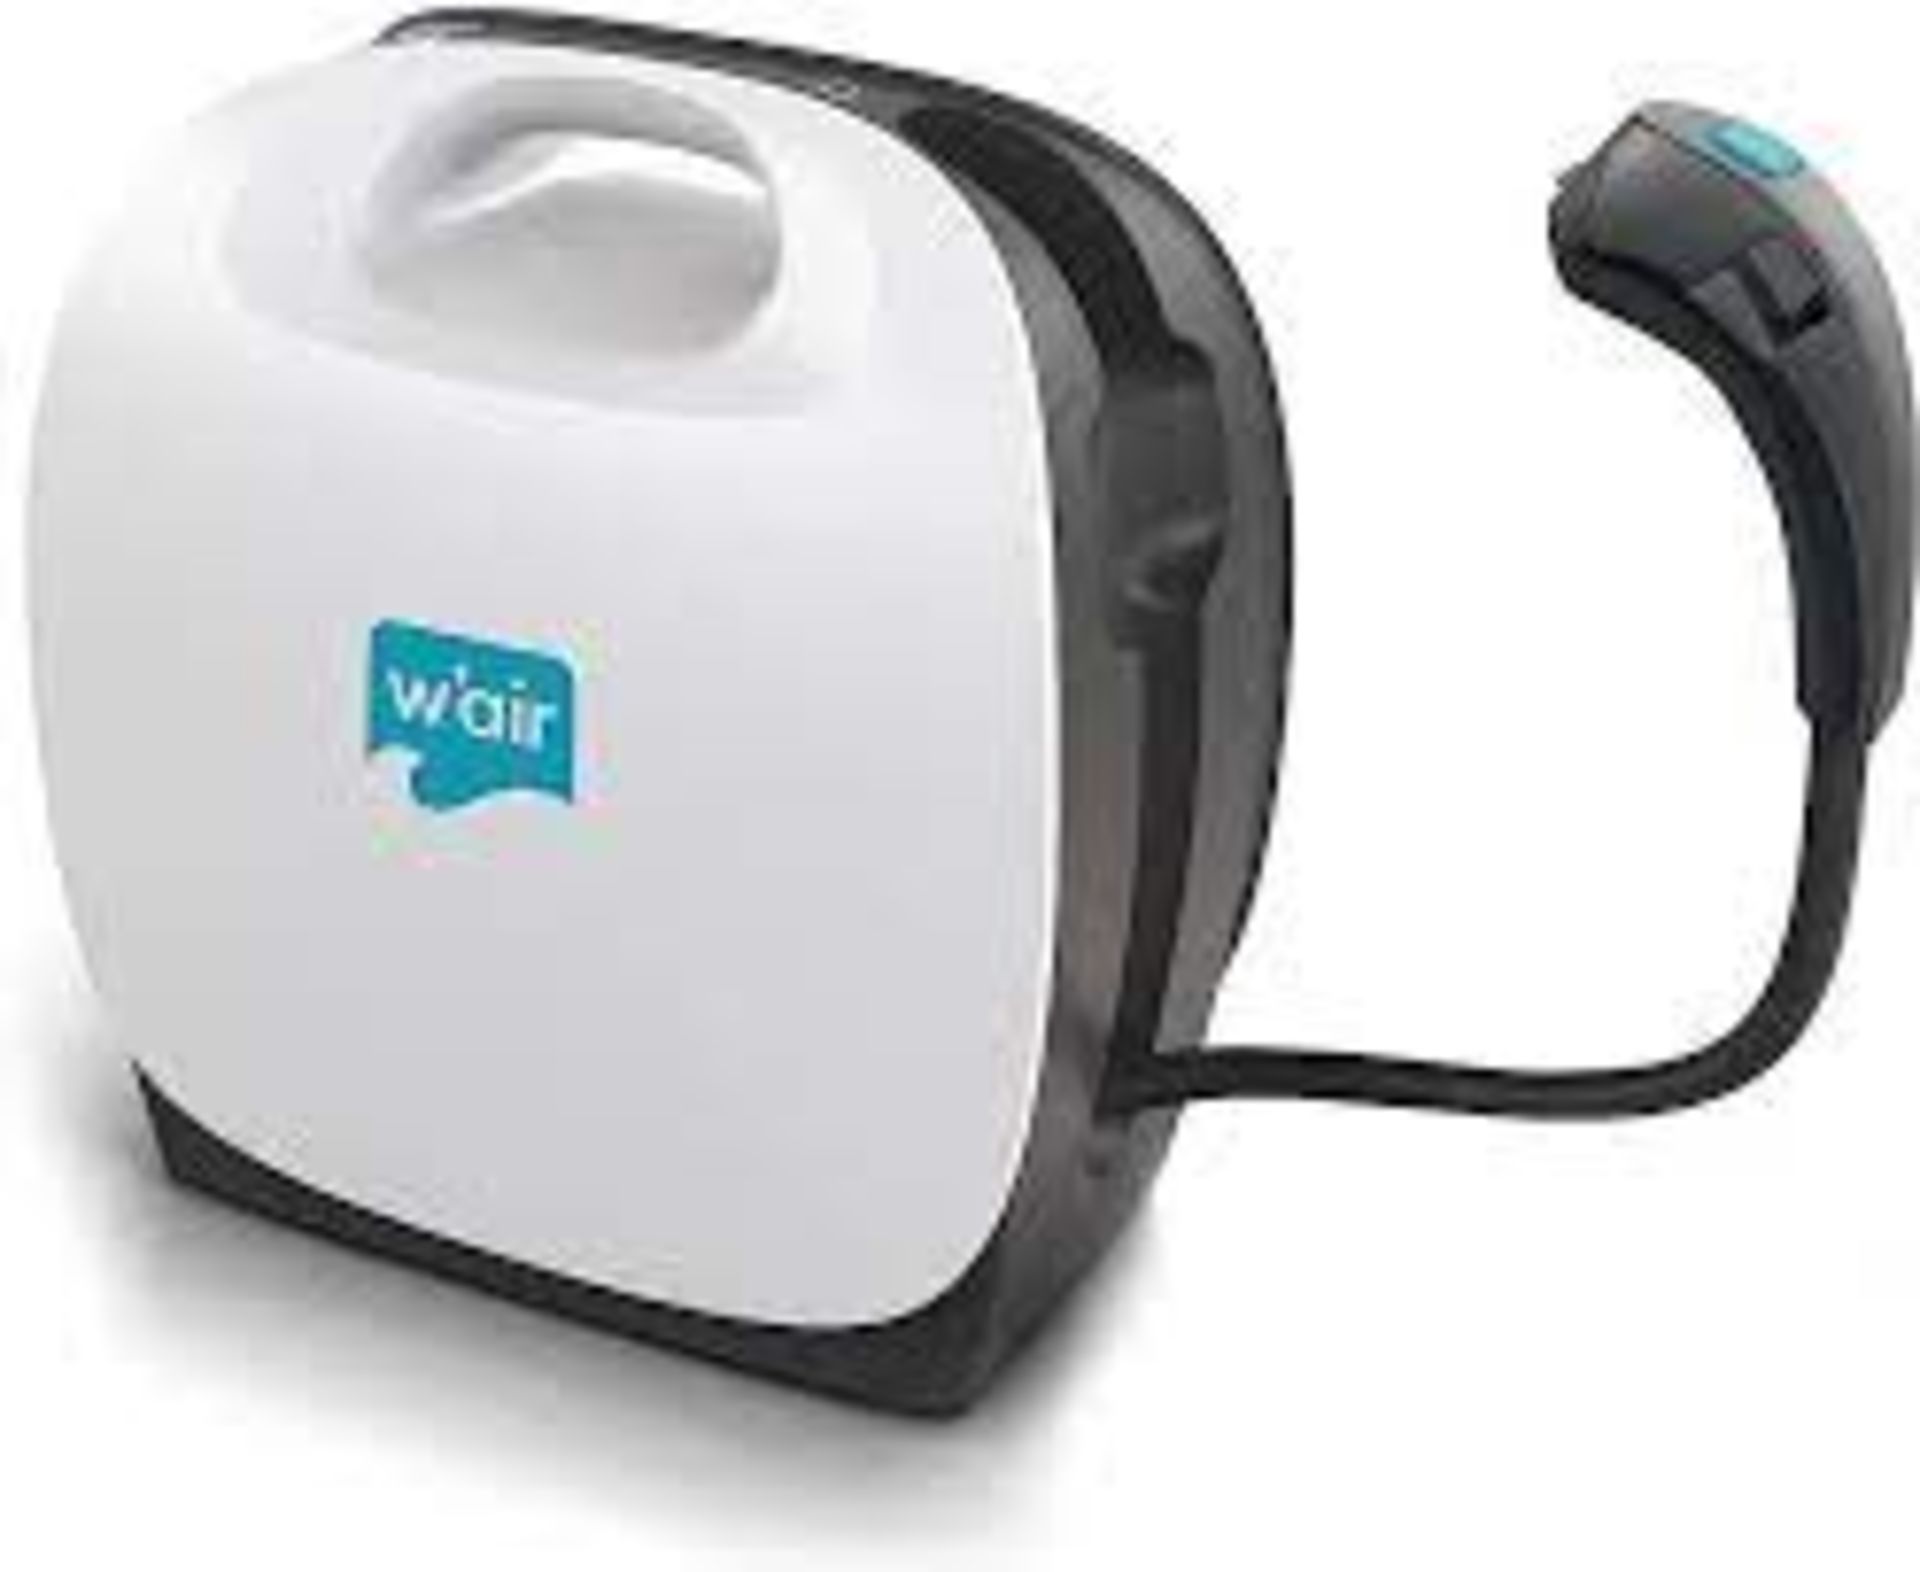 50 X BRAND NEW W'AIR SNEAKER CLEANING SYSTEMS RRP £299, The w'air uses hydrodynamic technology - Image 6 of 6